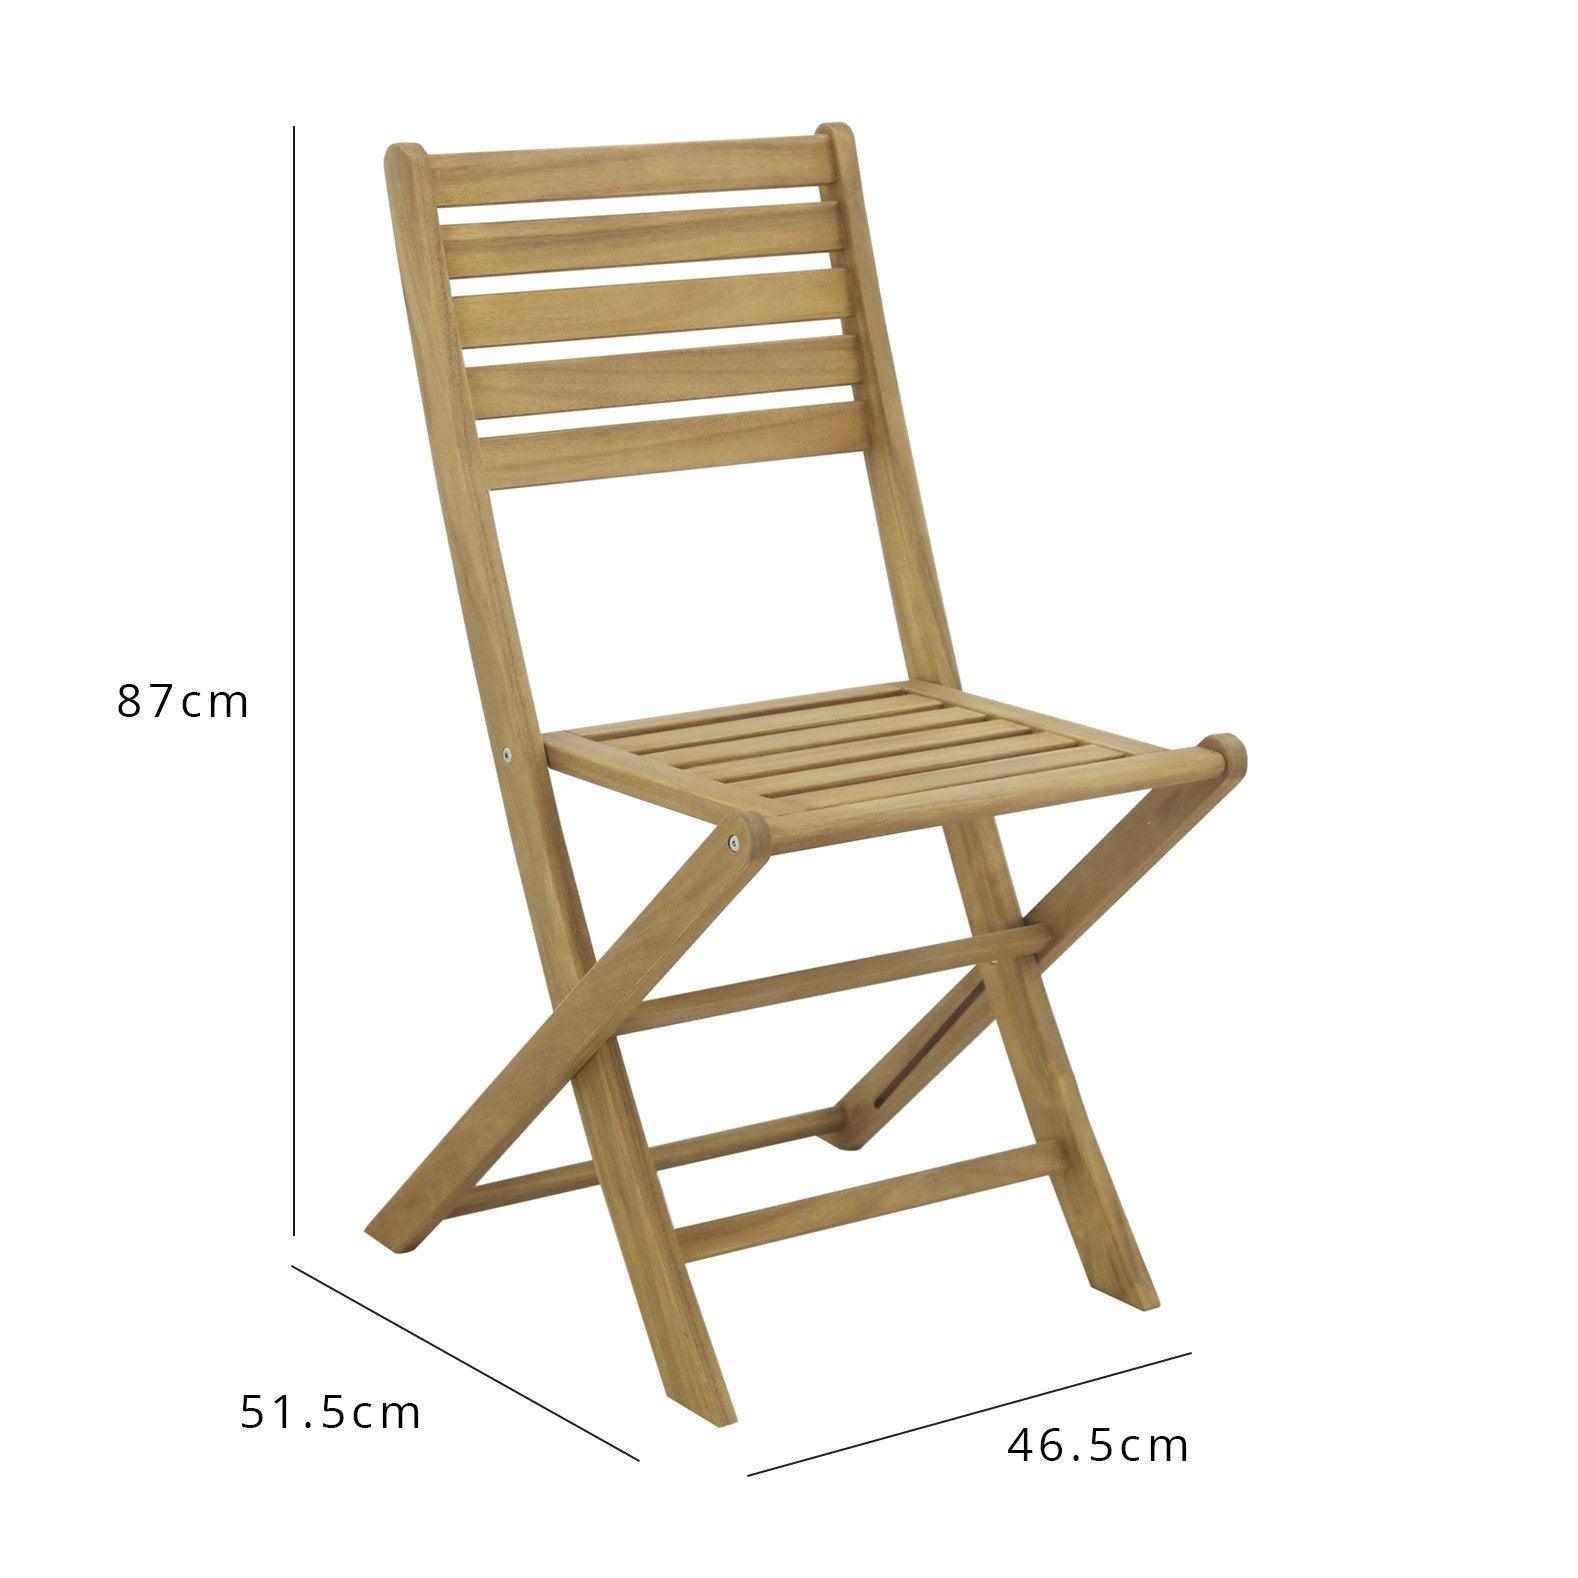 Outlet – Outdoor dining chairs - set of 2 - solid acacia wood - Laura James